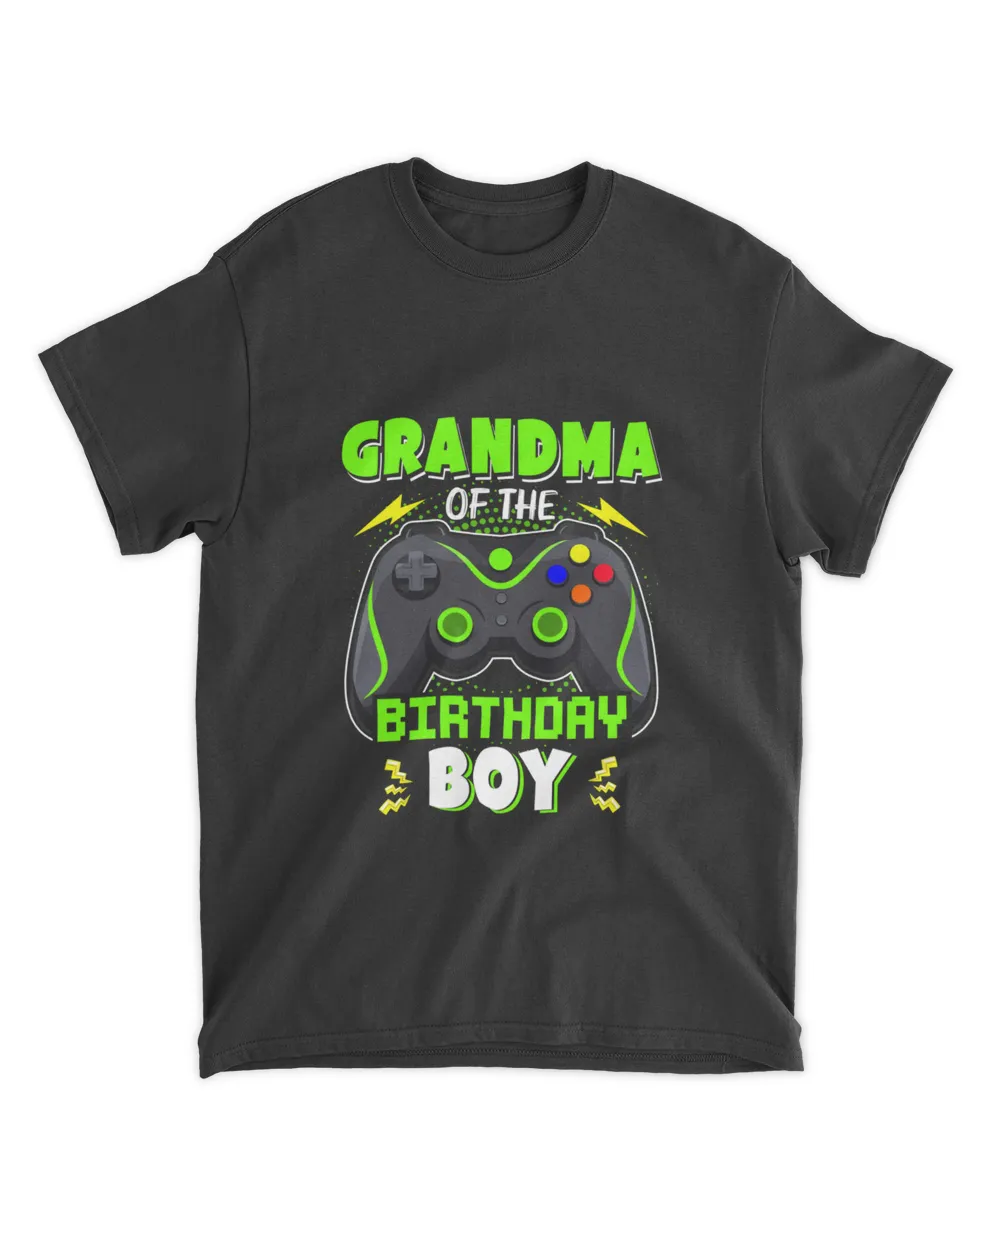 Grandma of the Birthday Boy Matching Video Gamer Top Party T-Shirt - Mothers Day Shirts For Grandma